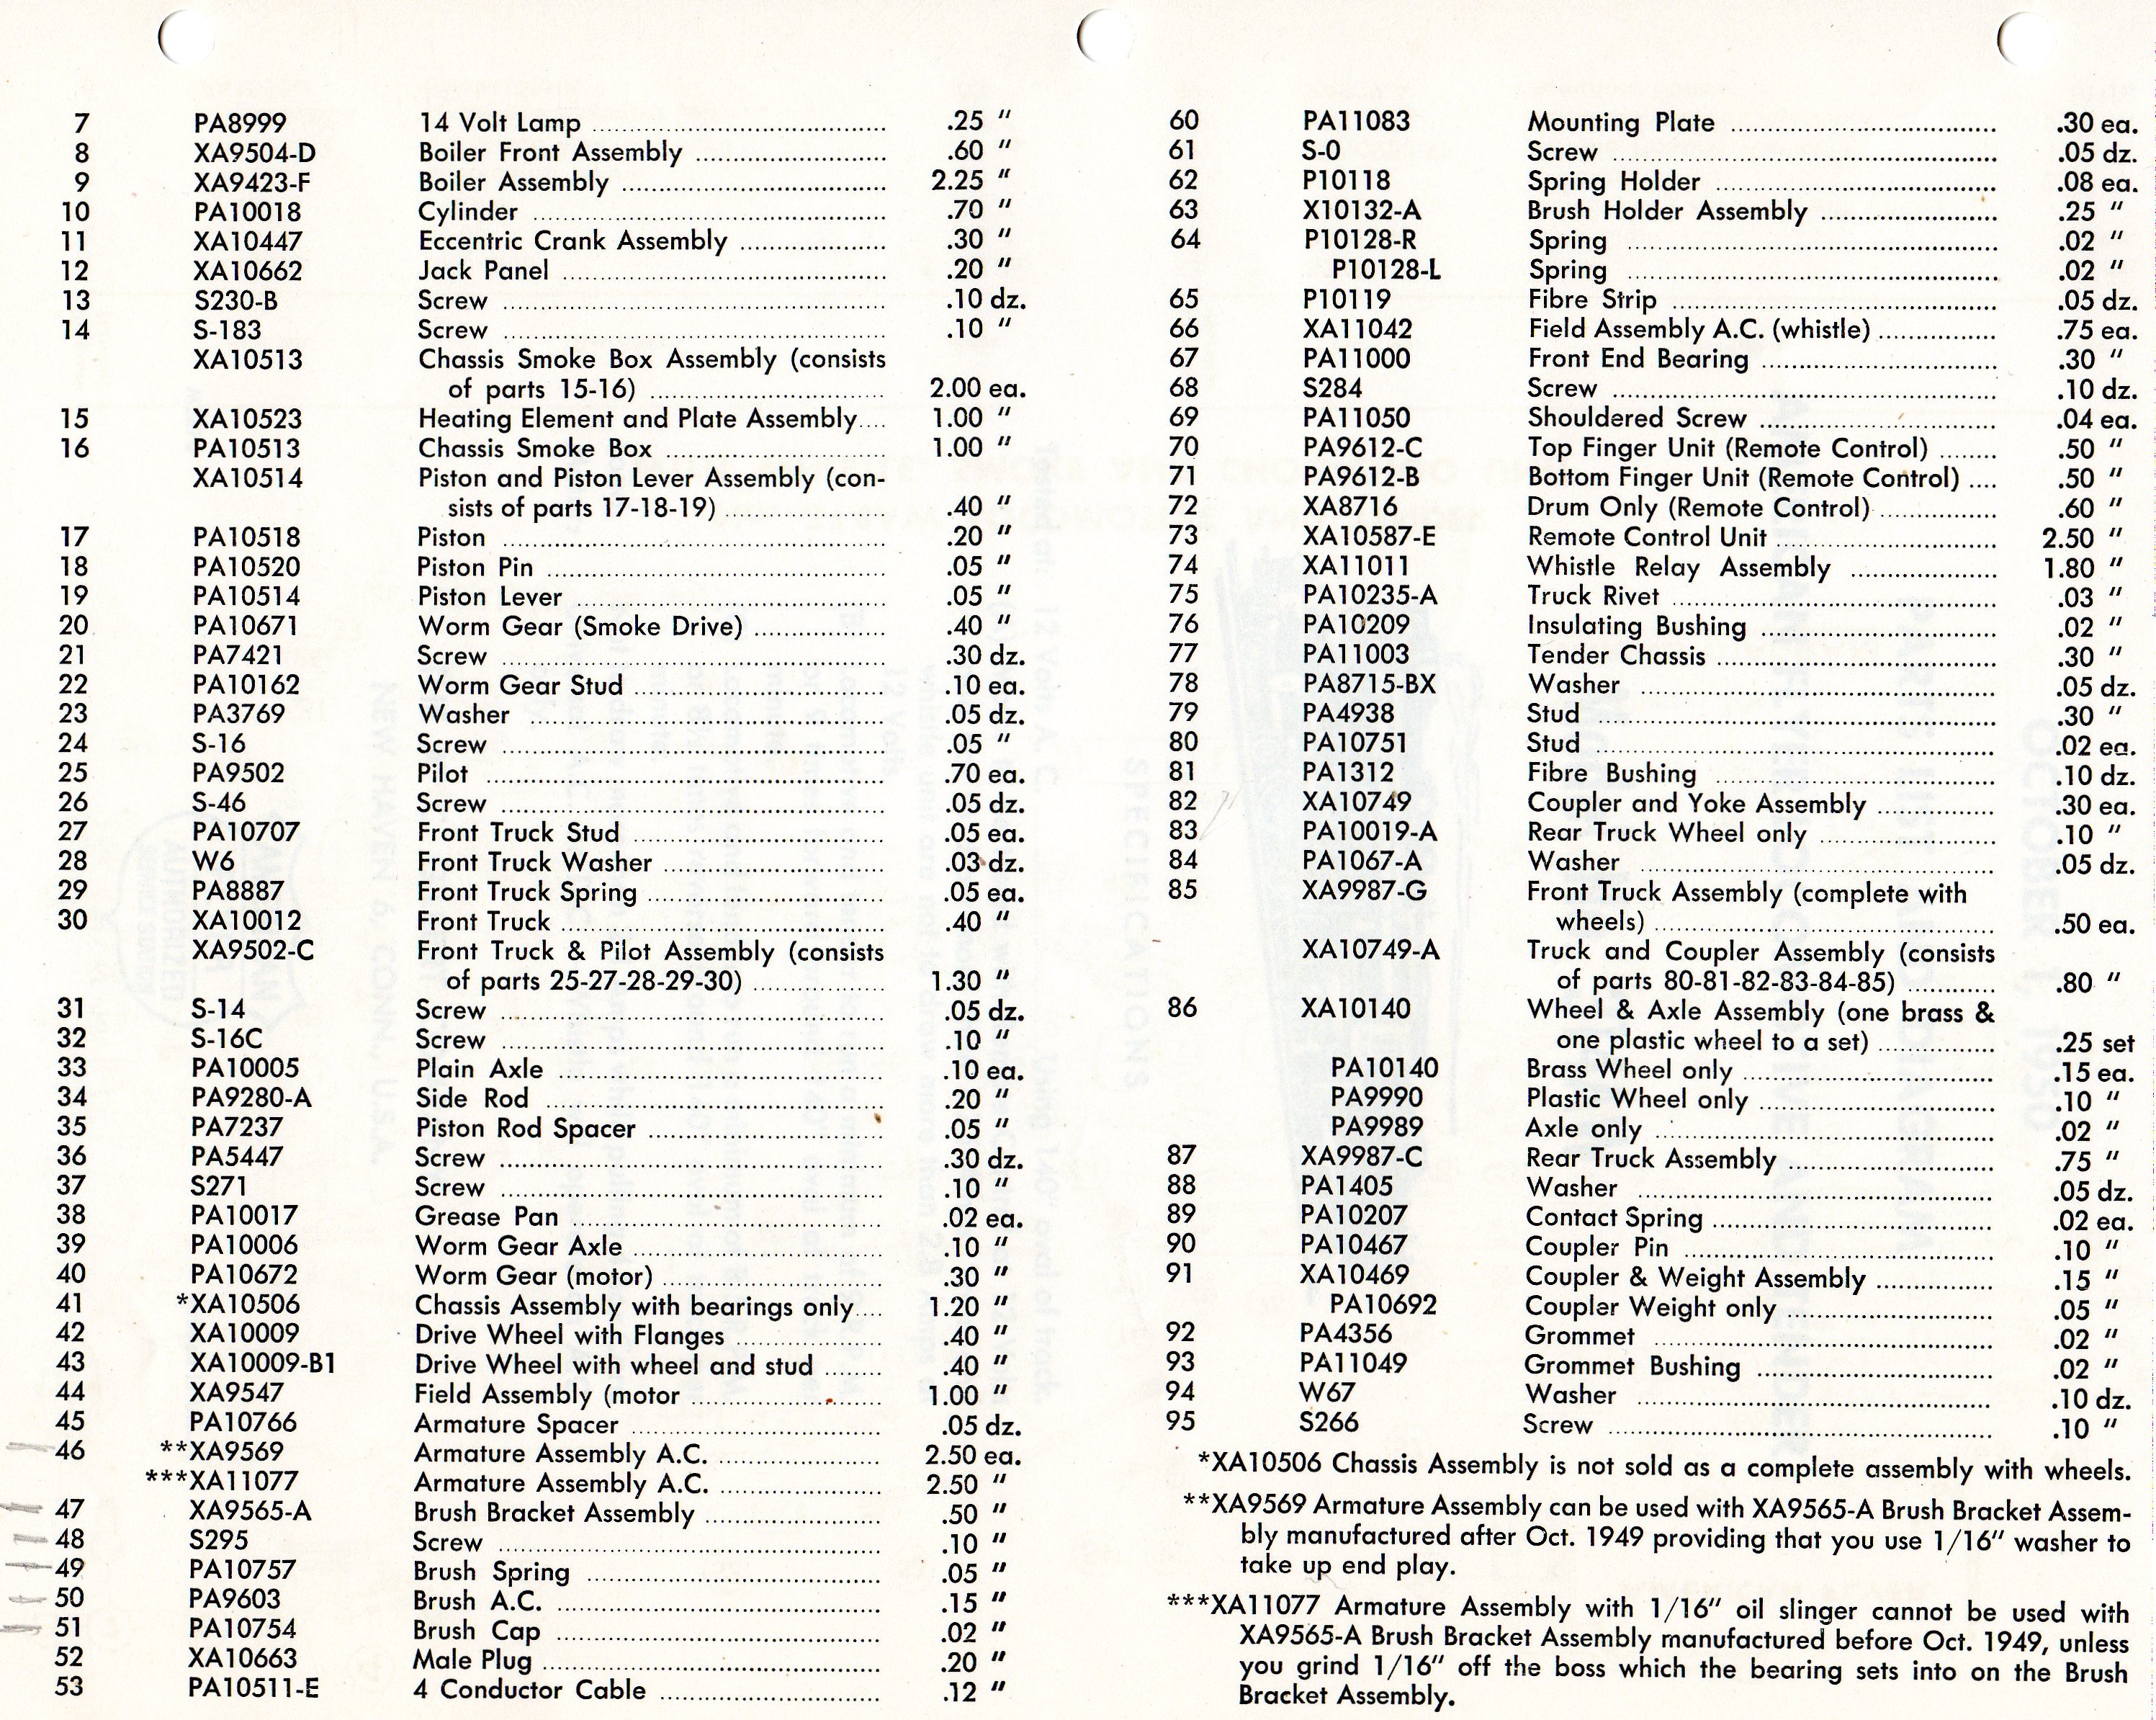 American Flyer Locomotive & Tender 314AW Parts List and Diagram - Page 3